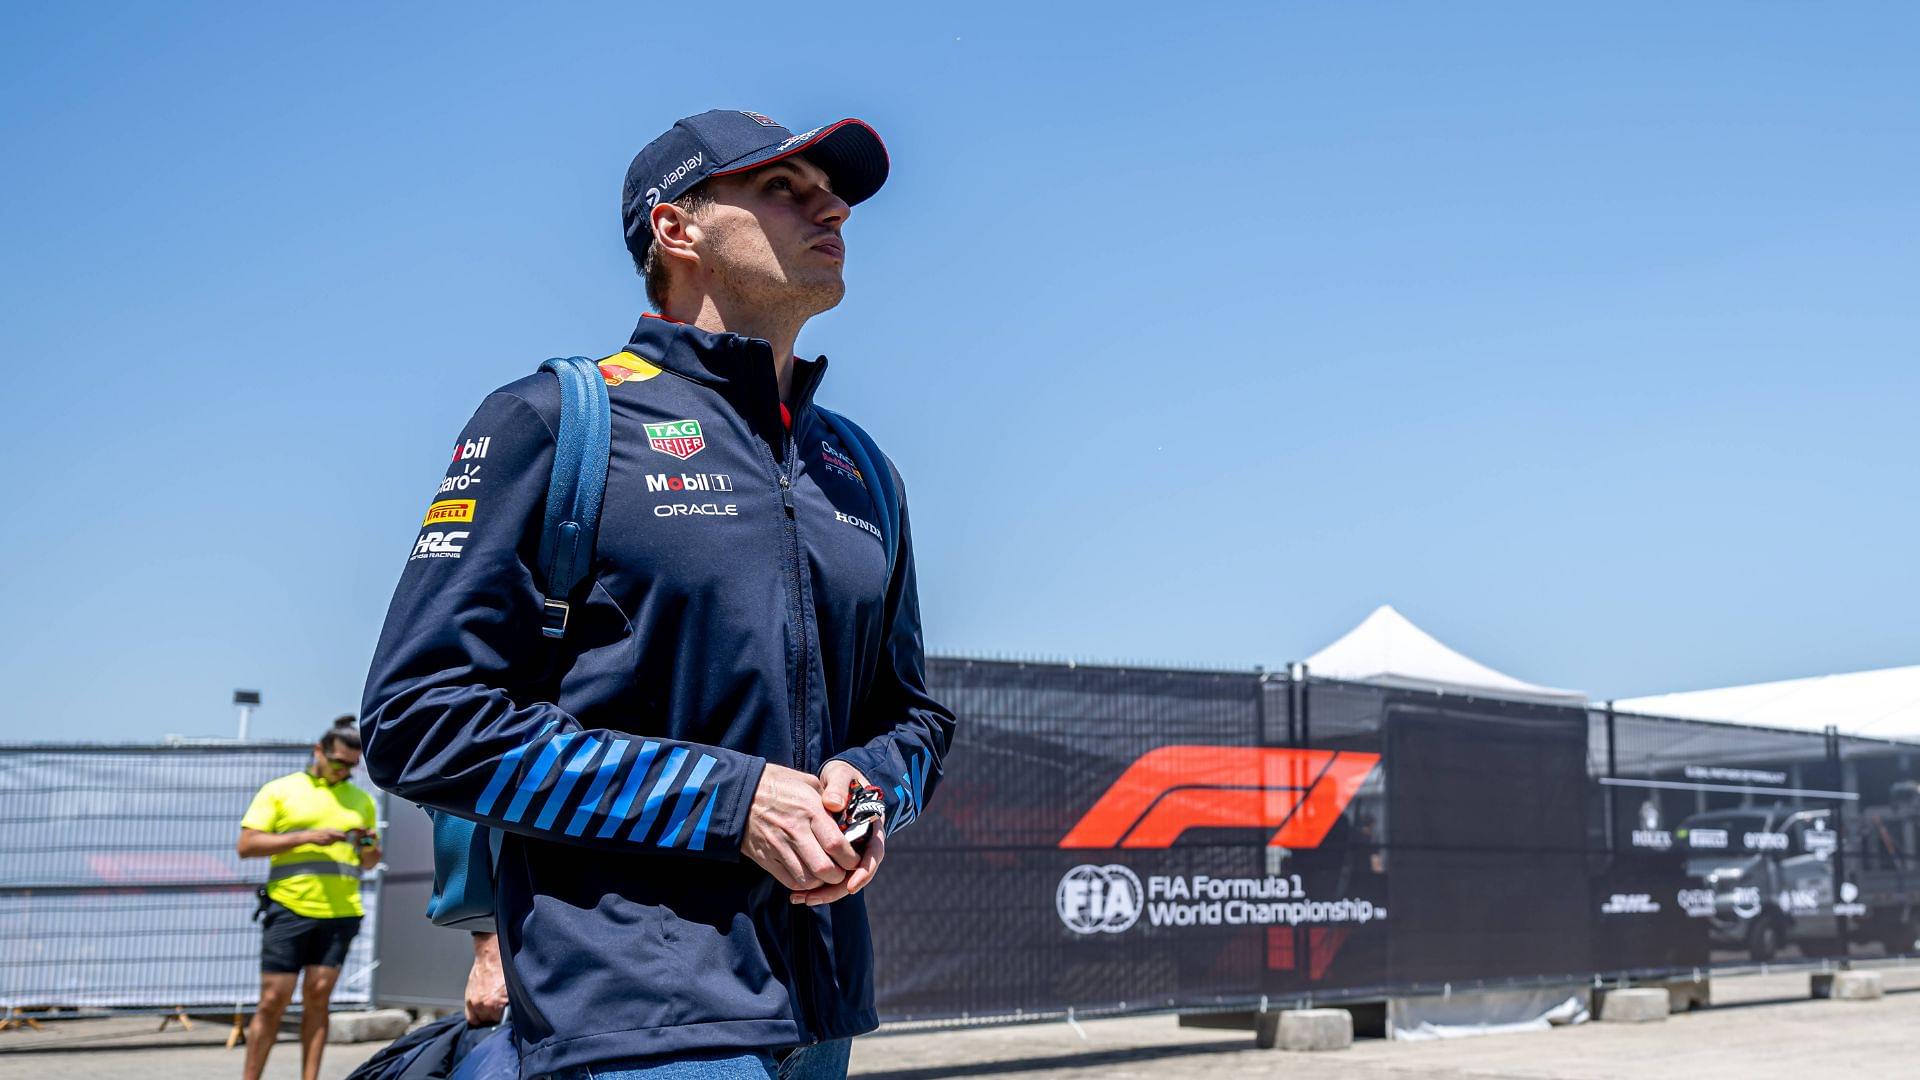 Max Verstappen Reveals Japan Brings the ‘Better Person’ Out in Him